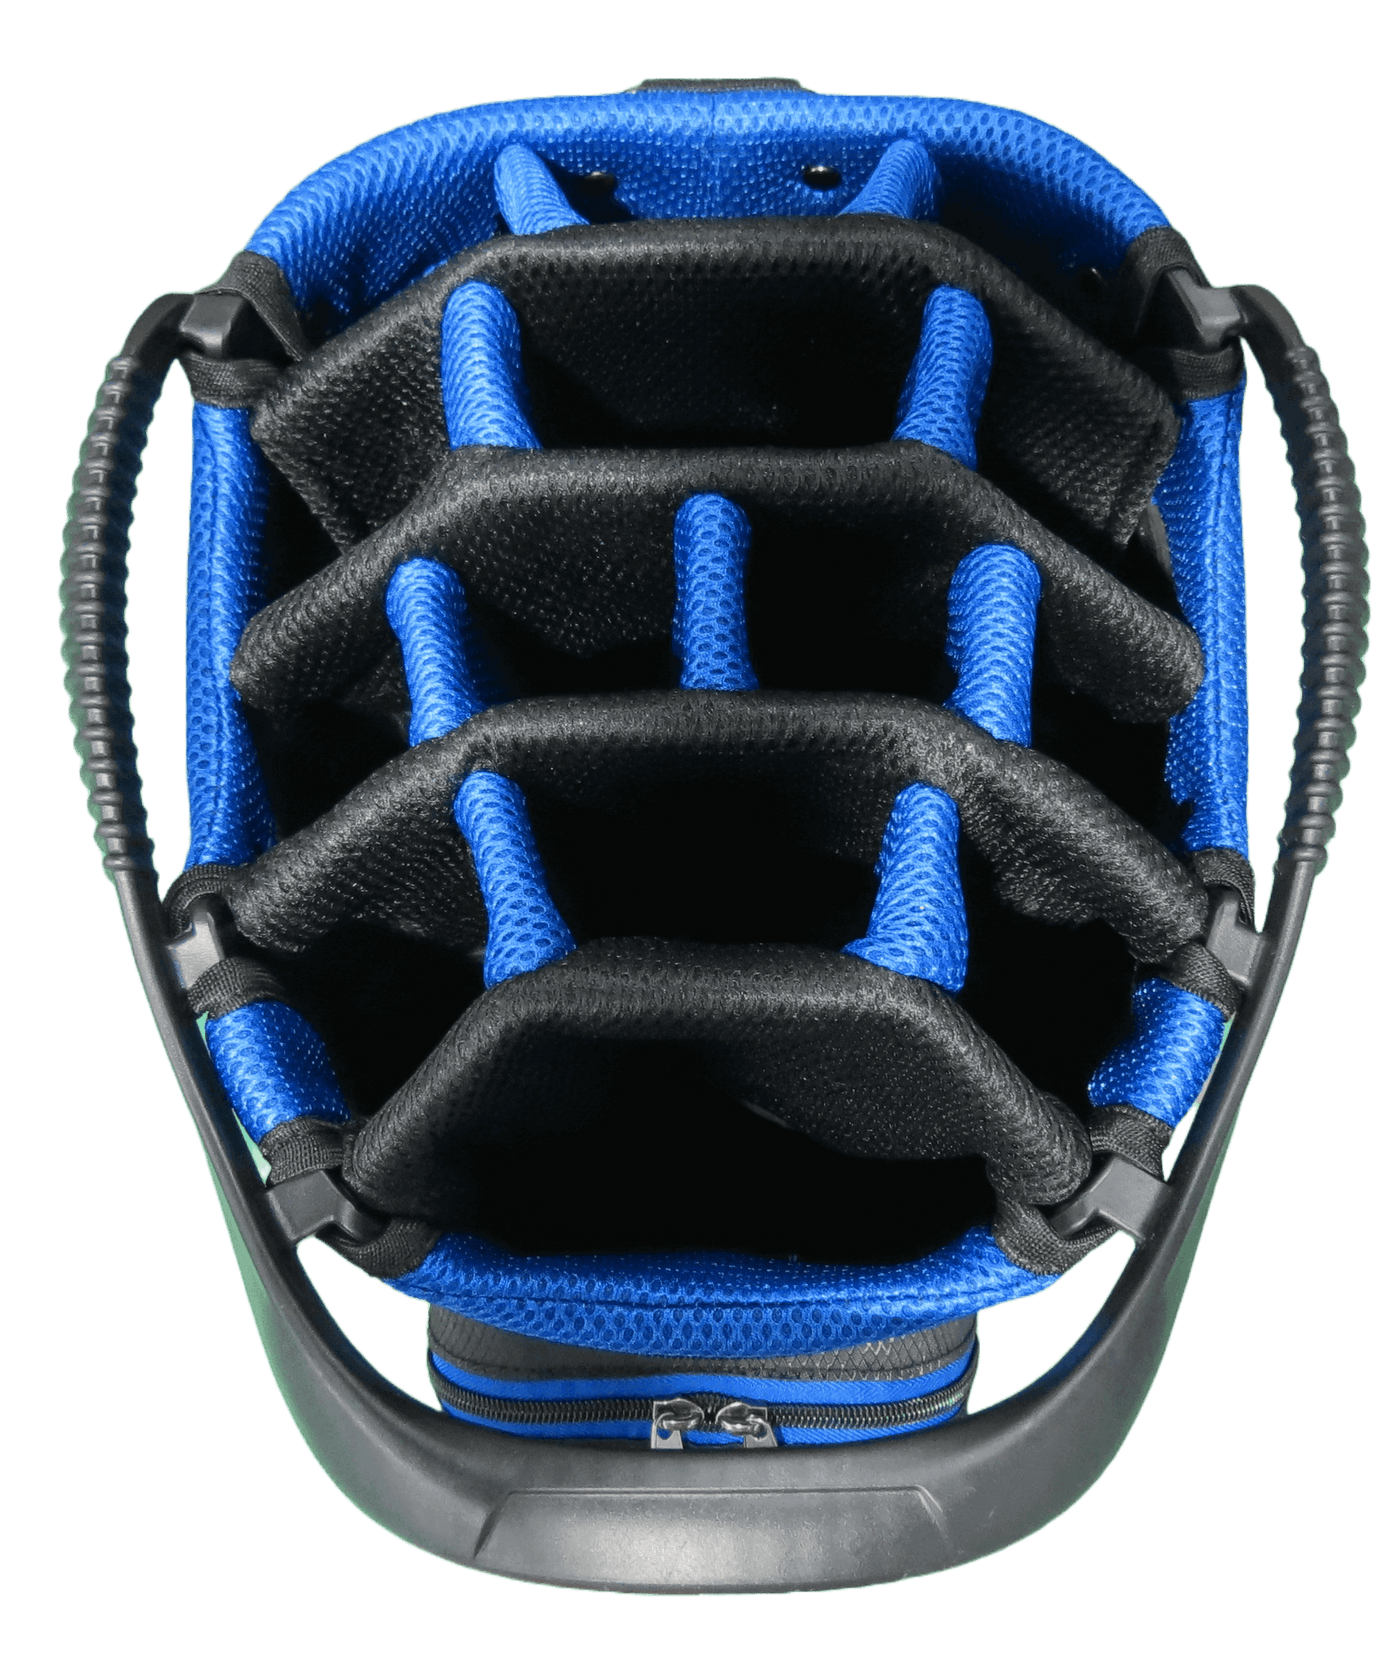 Top View of the Blue Trimmed Golf Cart Bag